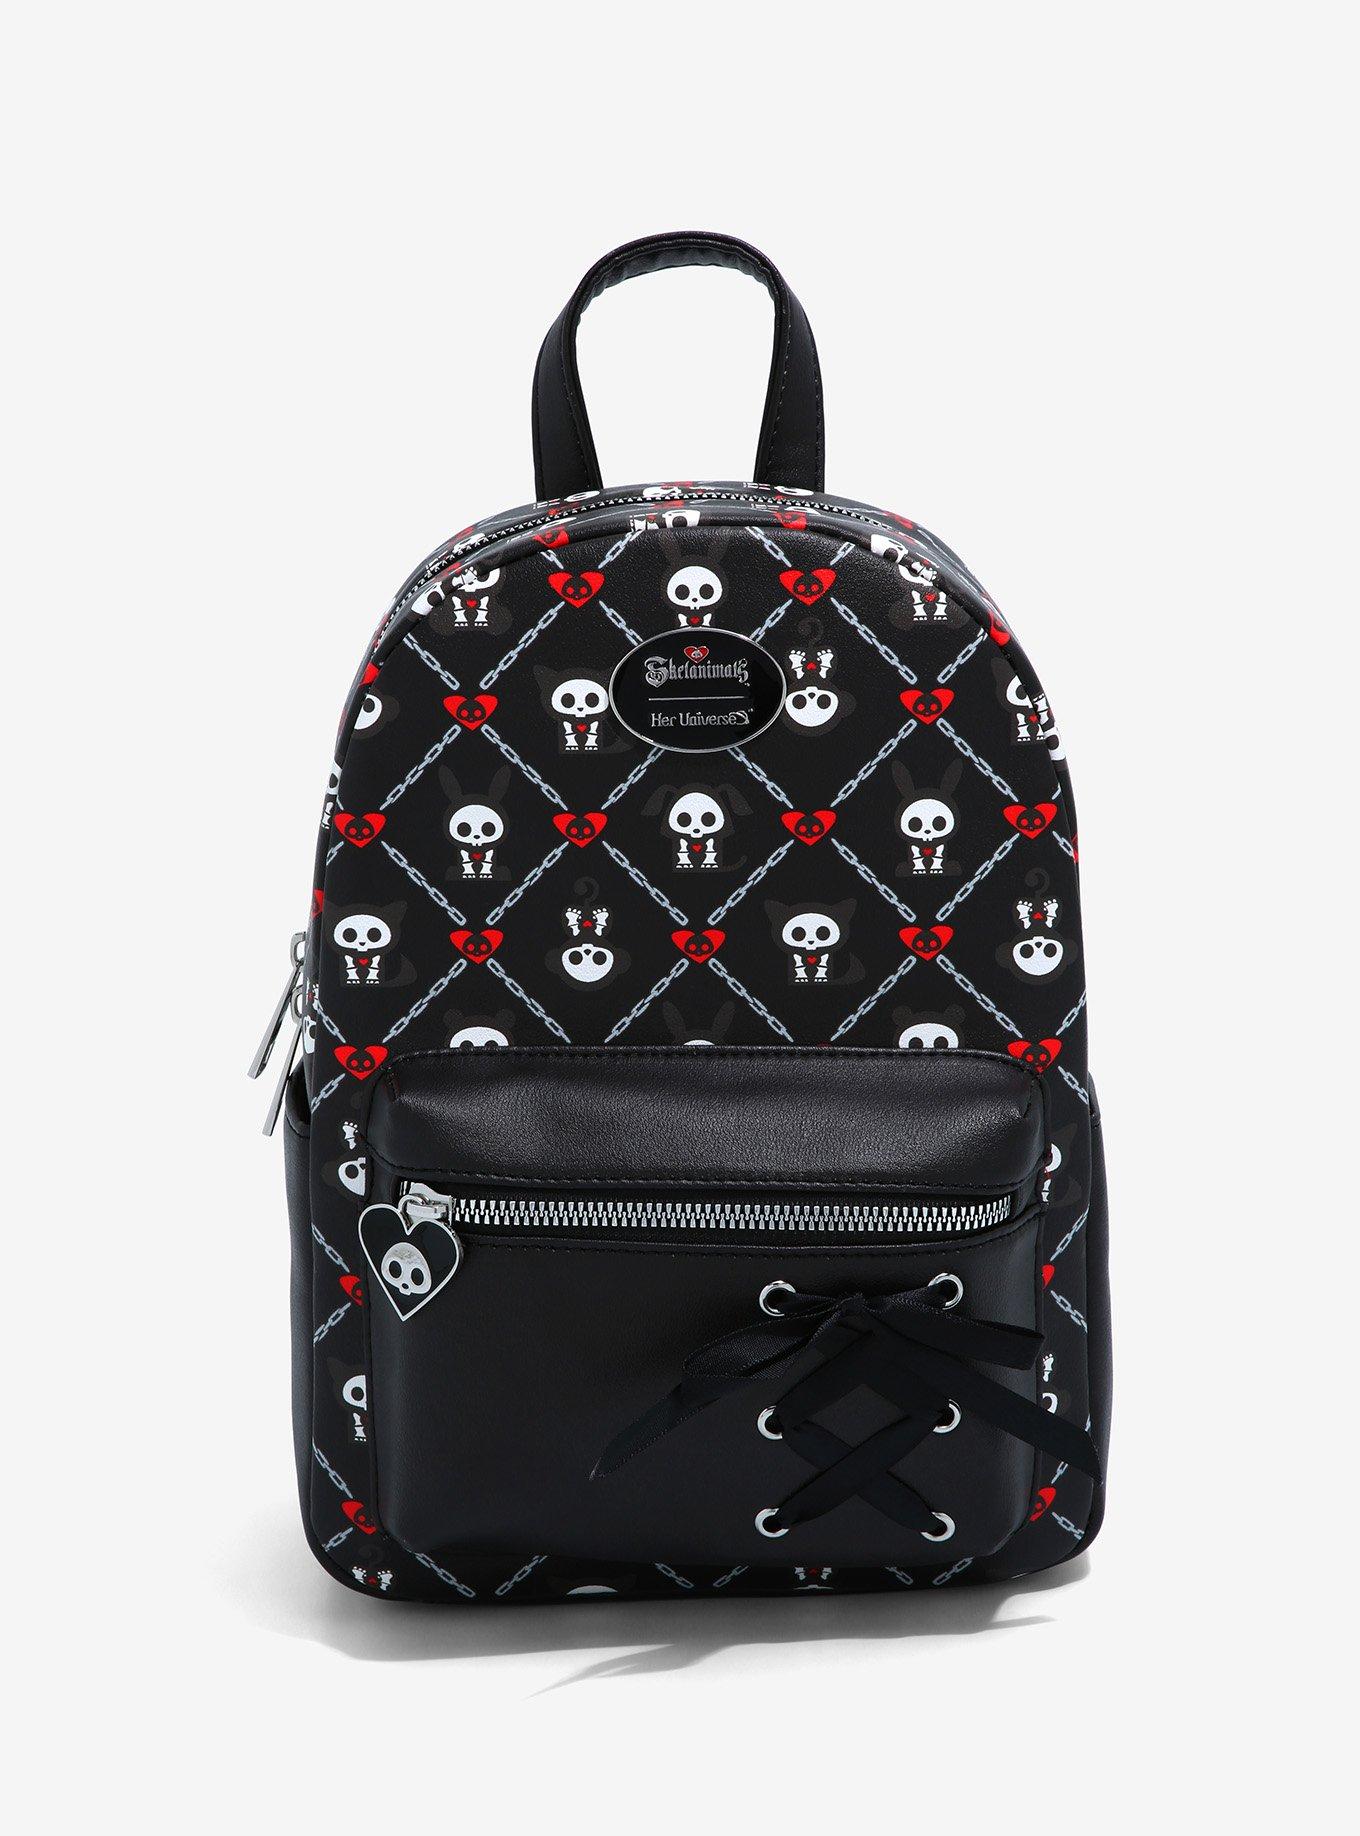 Her Universe Skelanimals Lace-Up Mini Backpack | Hot Topic